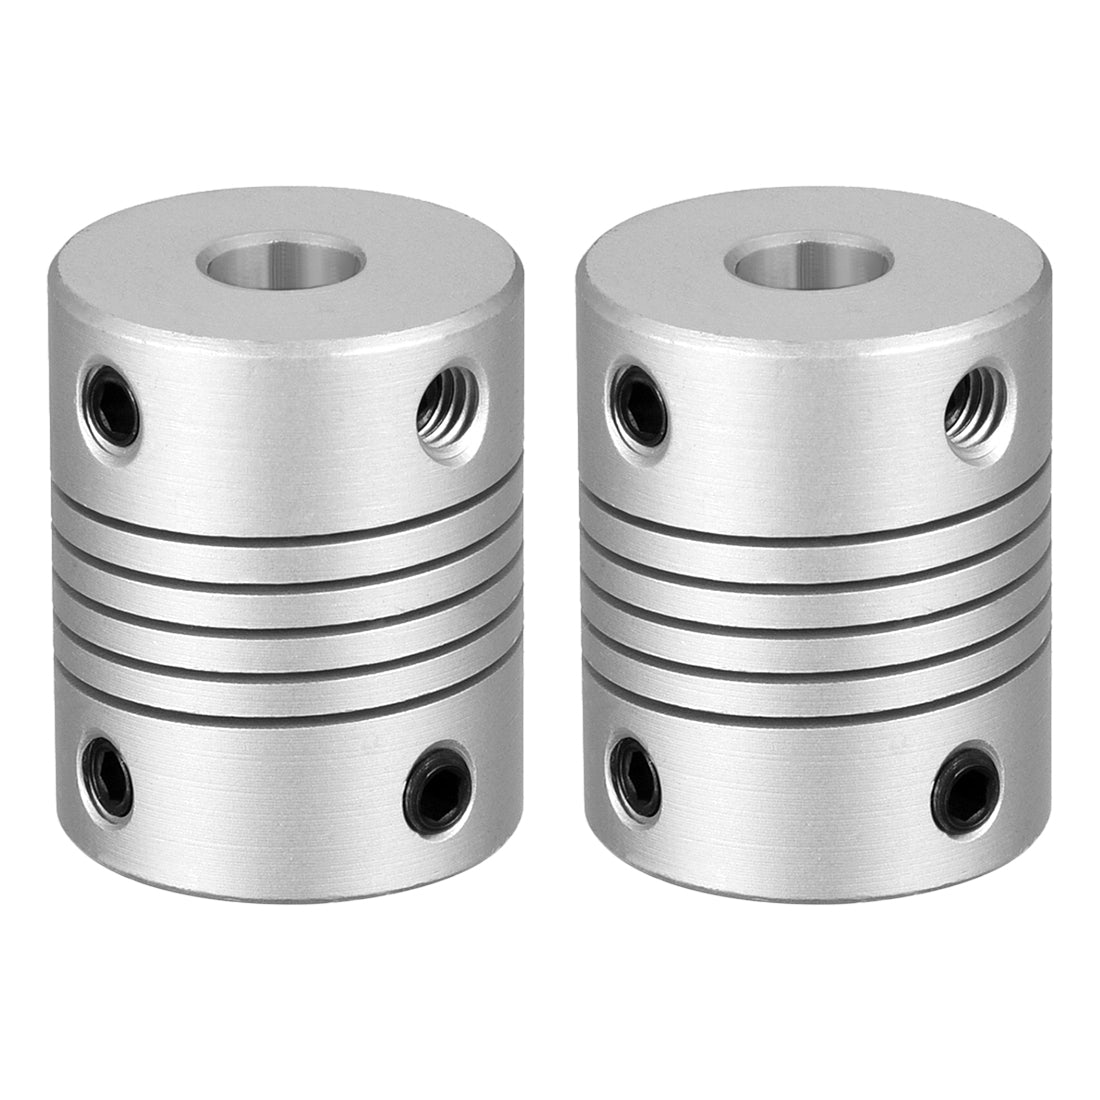 uxcell Uxcell 2pcs 5mm to 6mm Aluminum Alloy Shaft Coupling Flexible Coupler Motor Connector Joint L25xD19 Silver